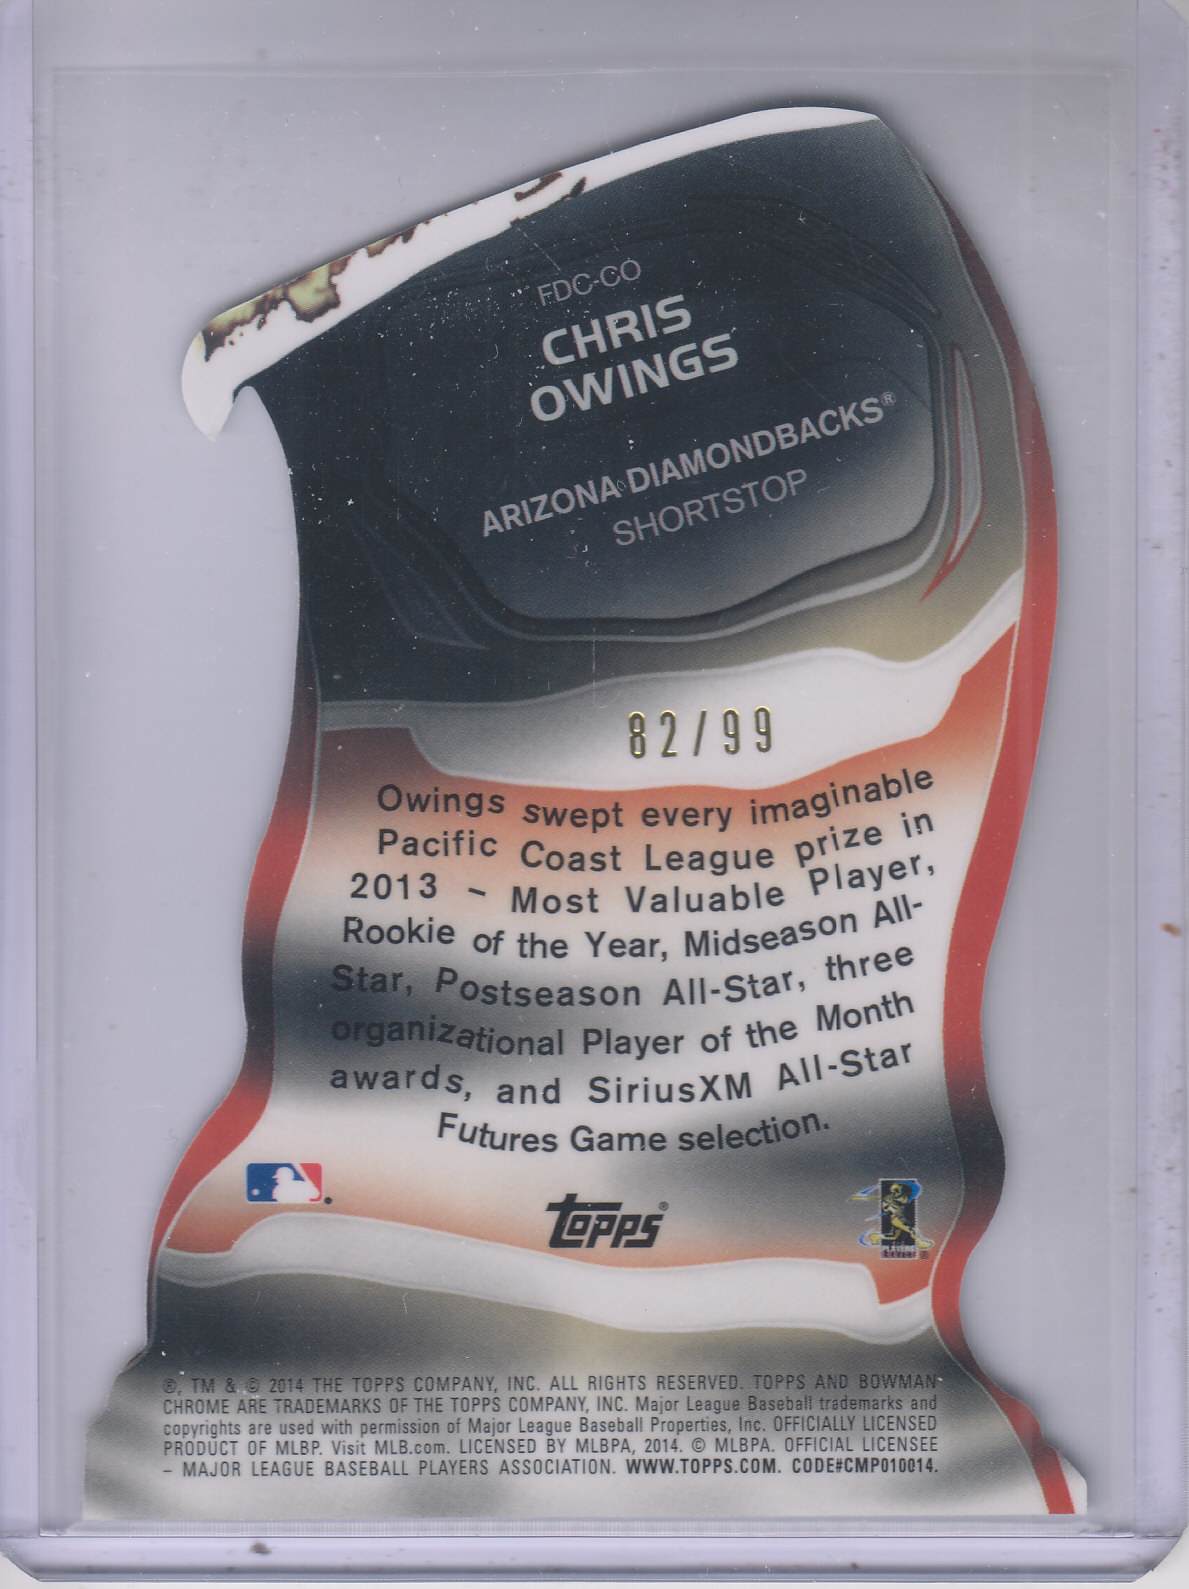 2014 Bowman Chrome Fire Die-Cut Atomic Refractors #FDCCO Chris Owings back image